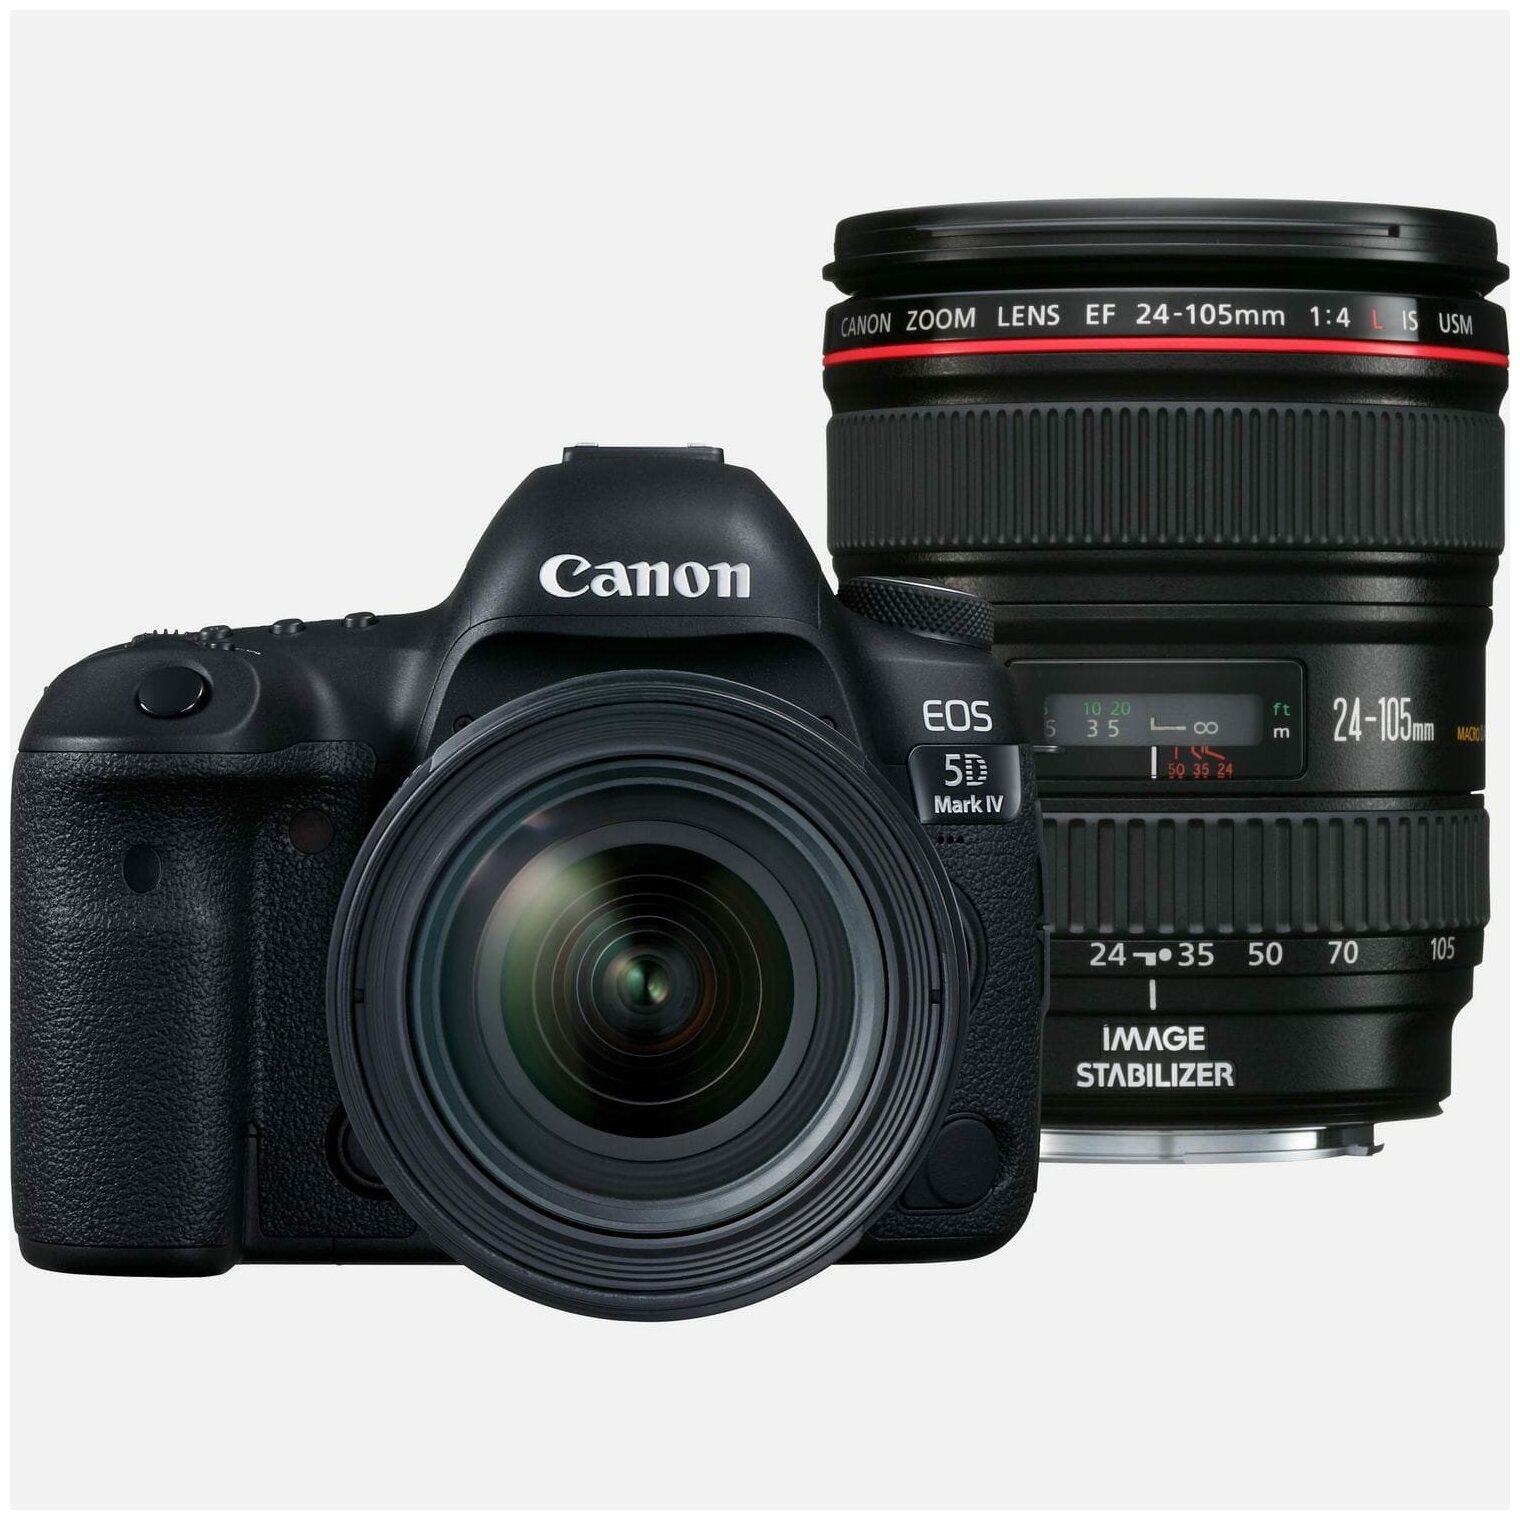 Canon EOS 5D Mark IV KIT 24-105mm f/4L IS USM